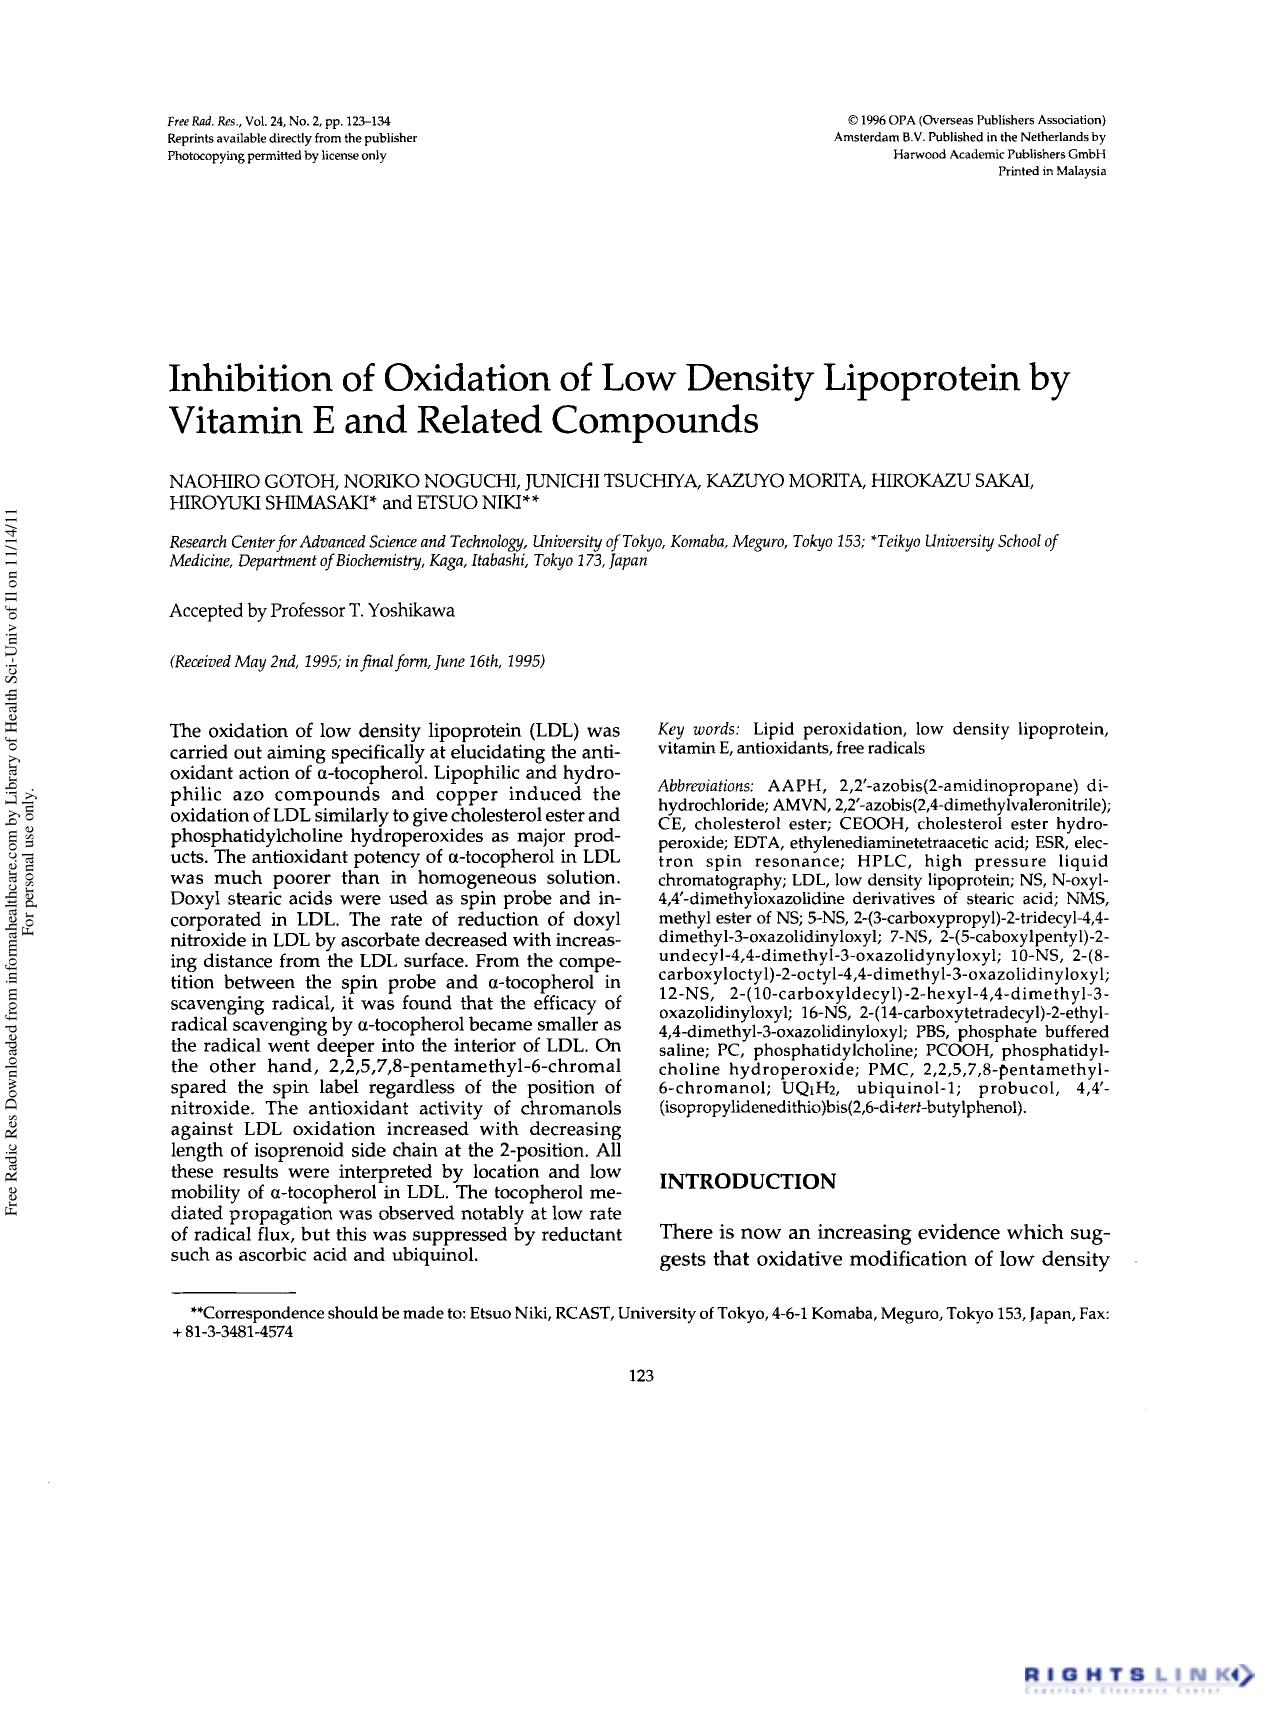 Inhibition of Oxidation of Low Density Lipoprotein by Vitamin E and Related Compounds by unknow